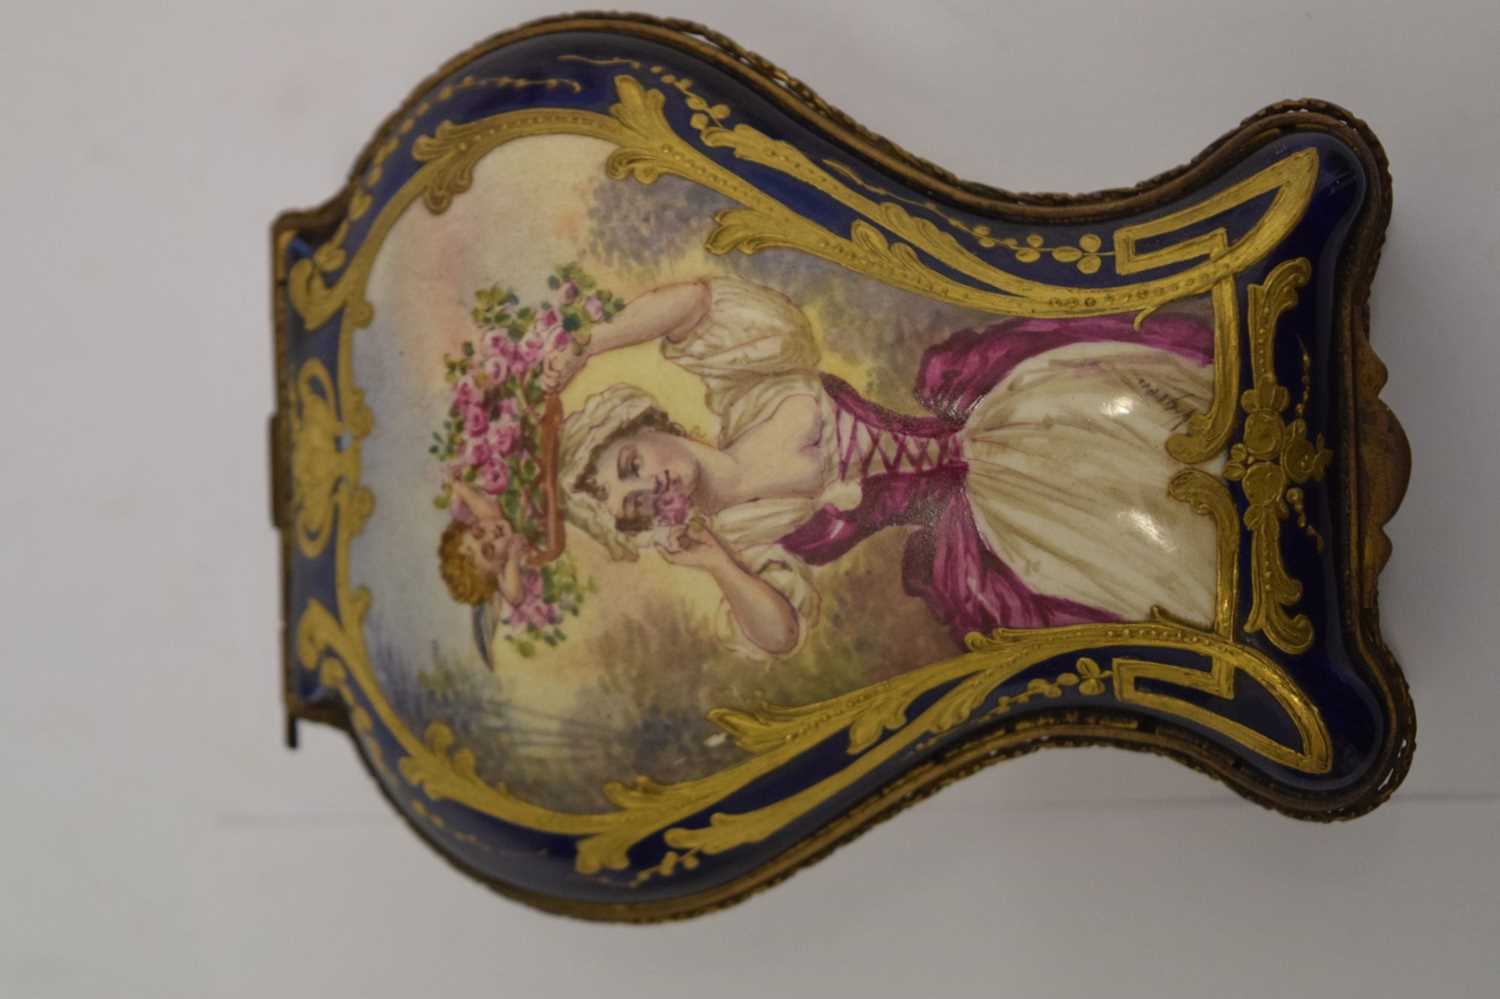 18th century-style porcelain and gilt metal box - Image 6 of 8